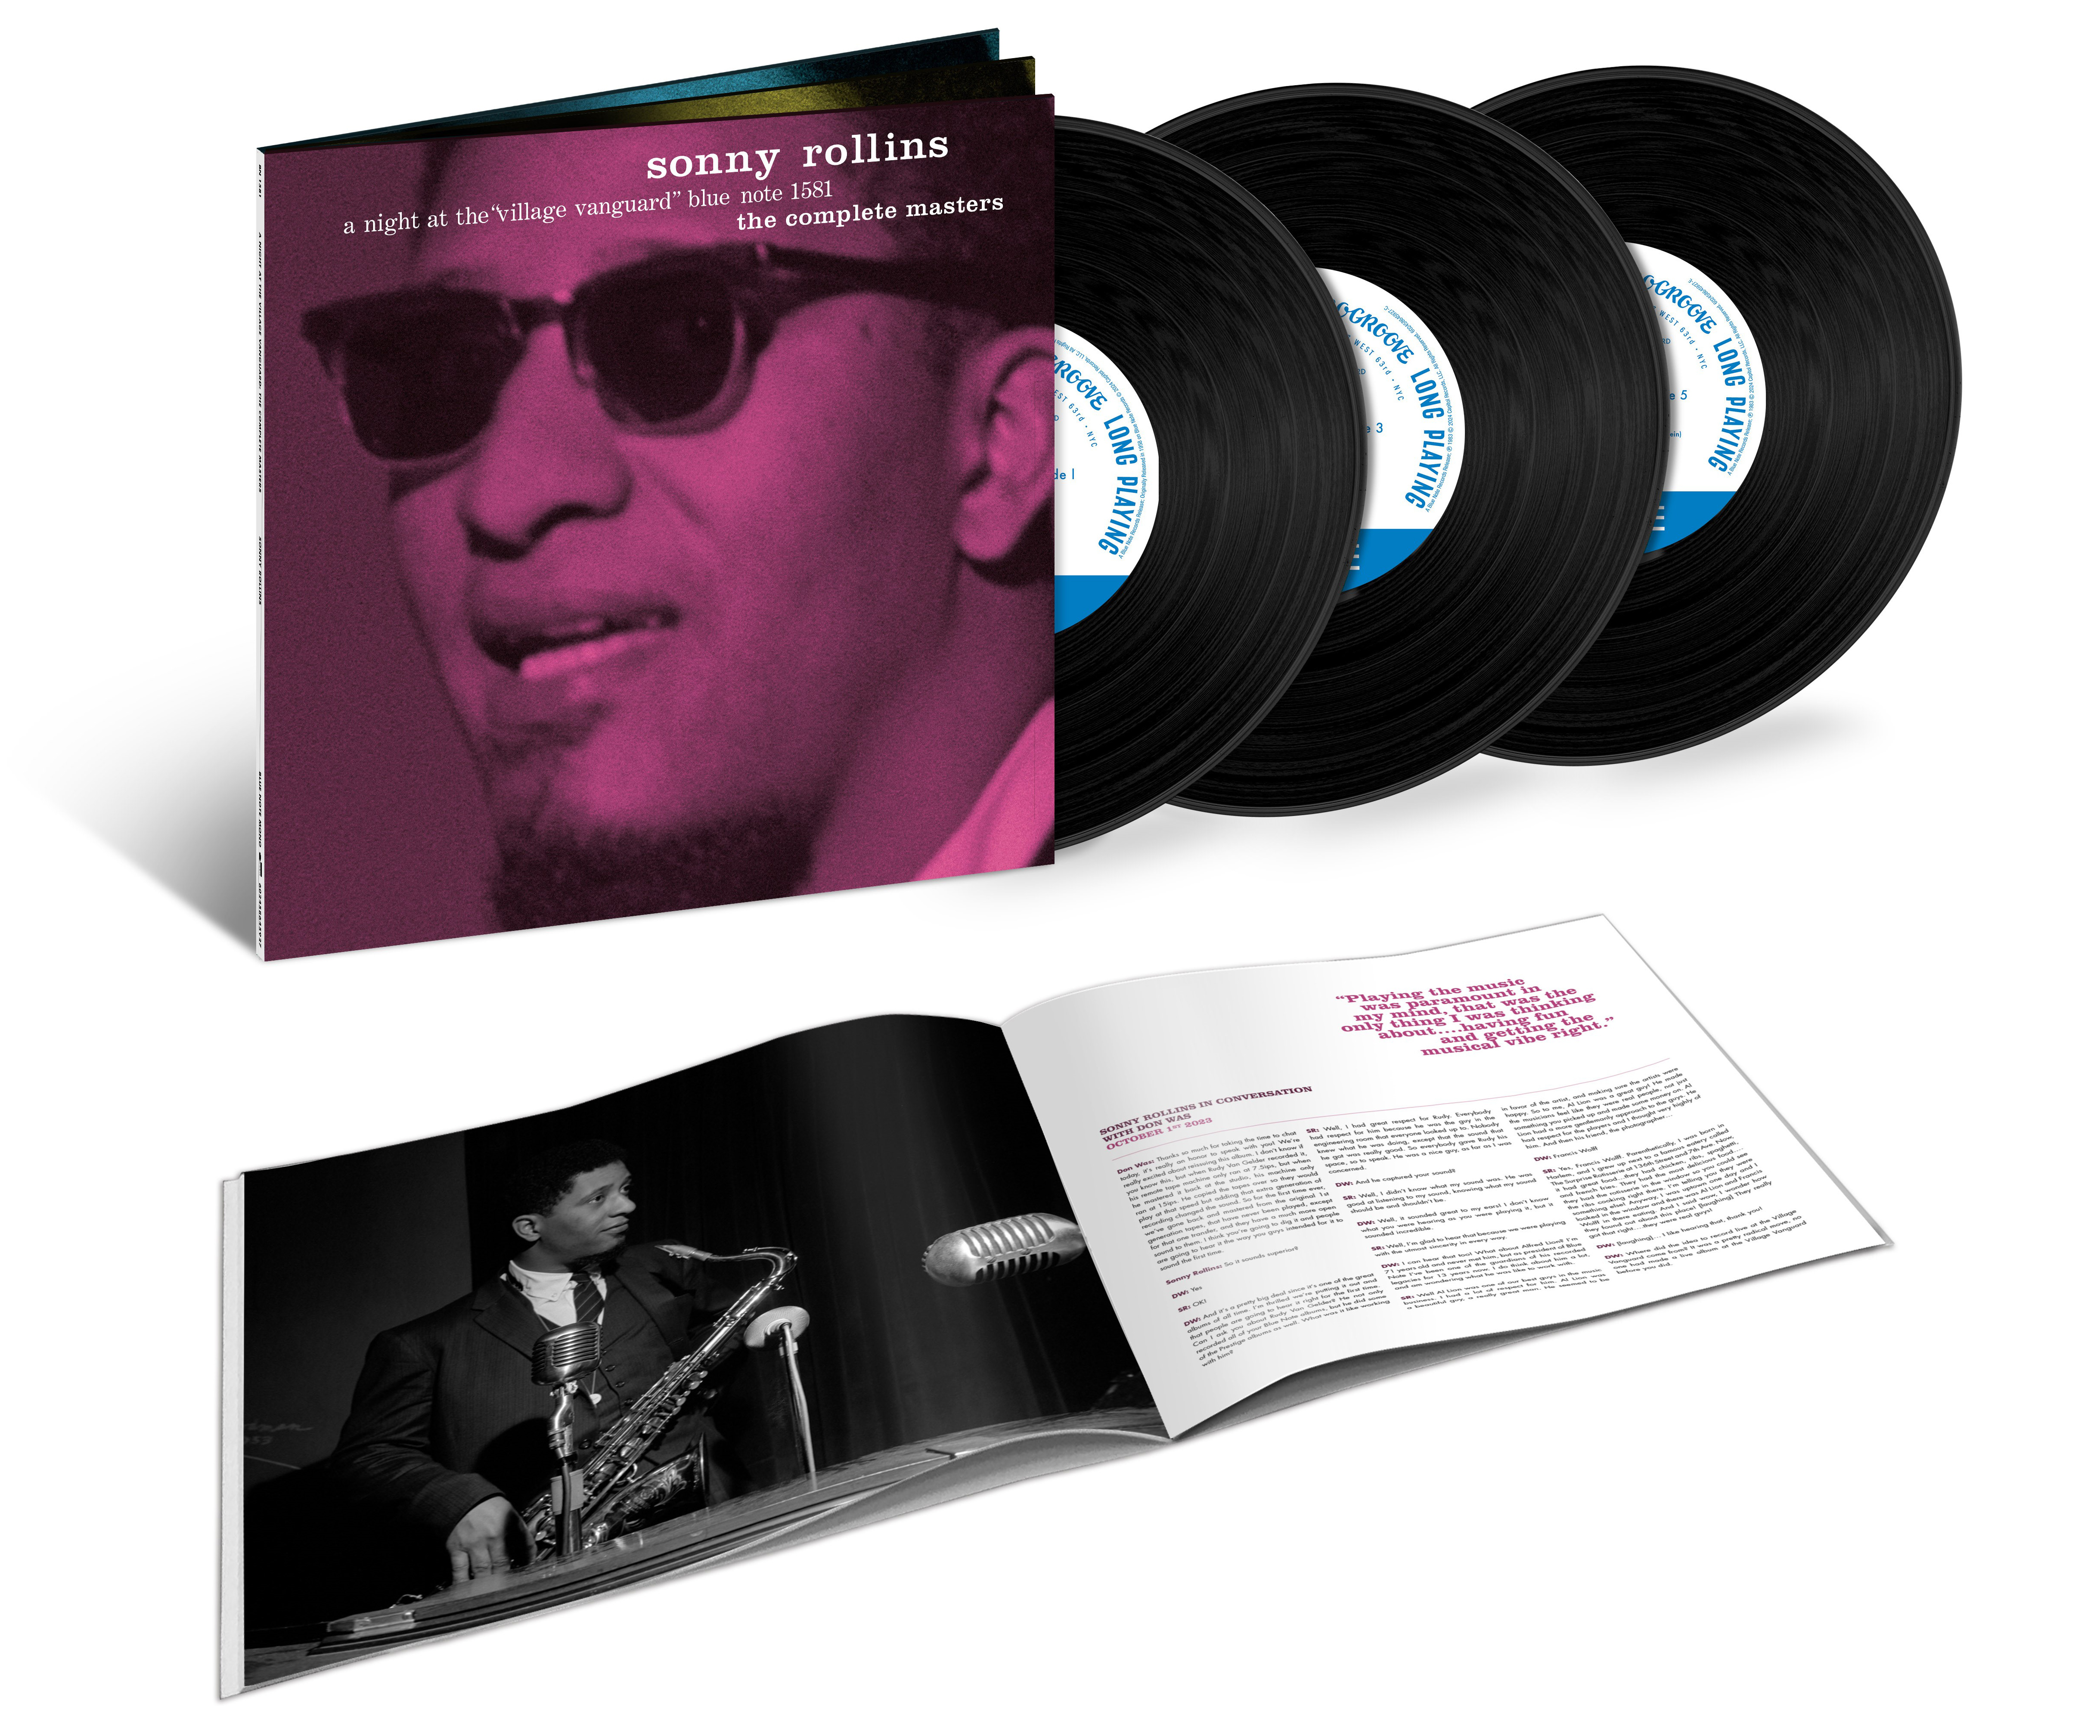 Sonny Rollins "a night at the Village Vanguard"—the complete masters